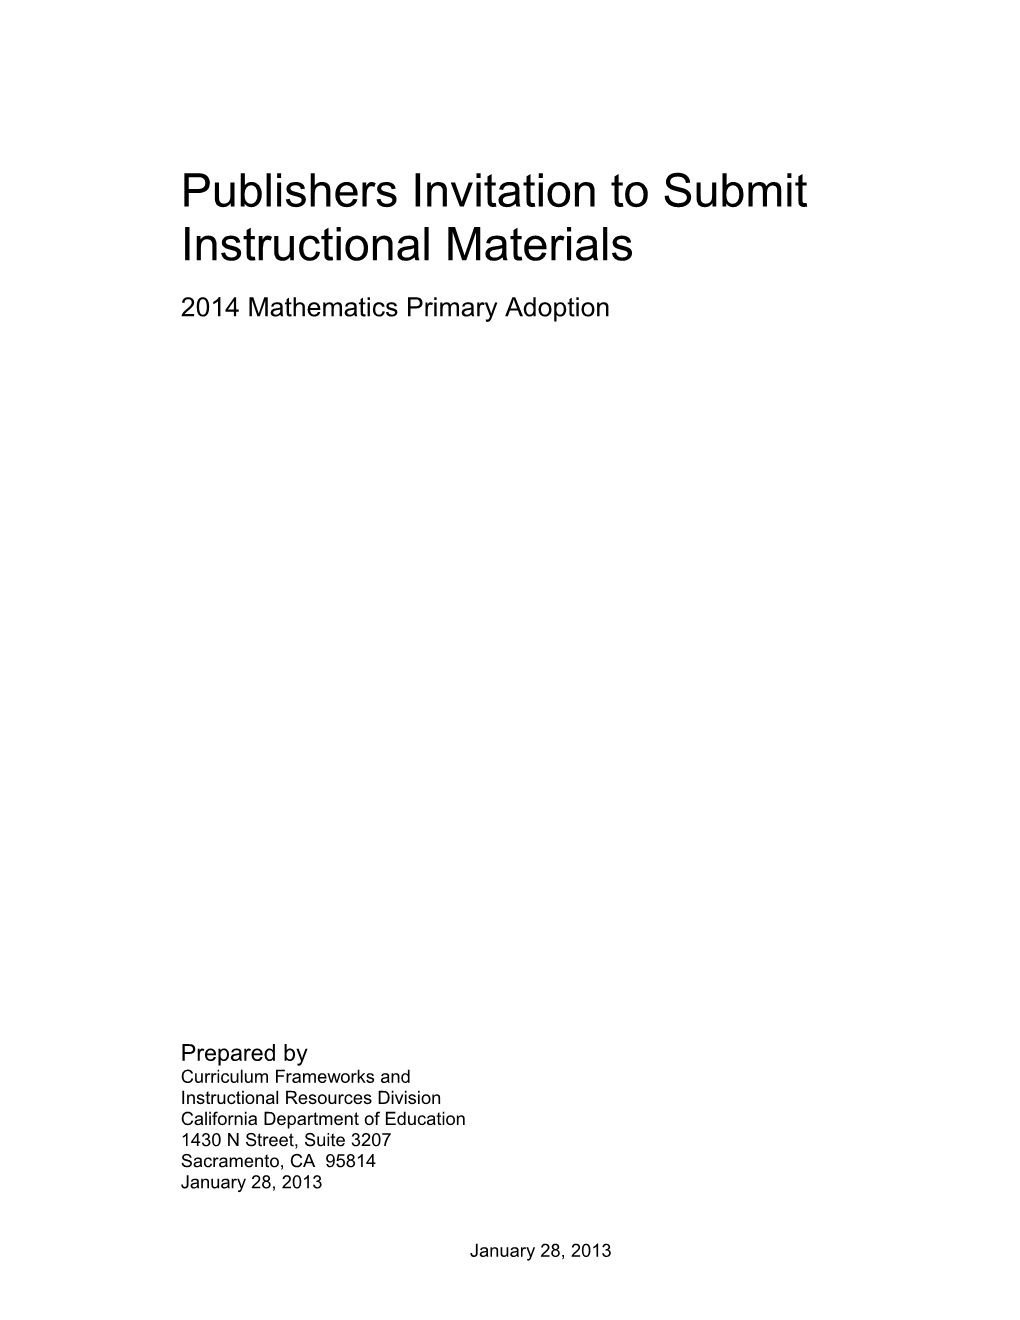 Publishers Invitation To Submit - Instructional Materials (CA Dept Of Education)